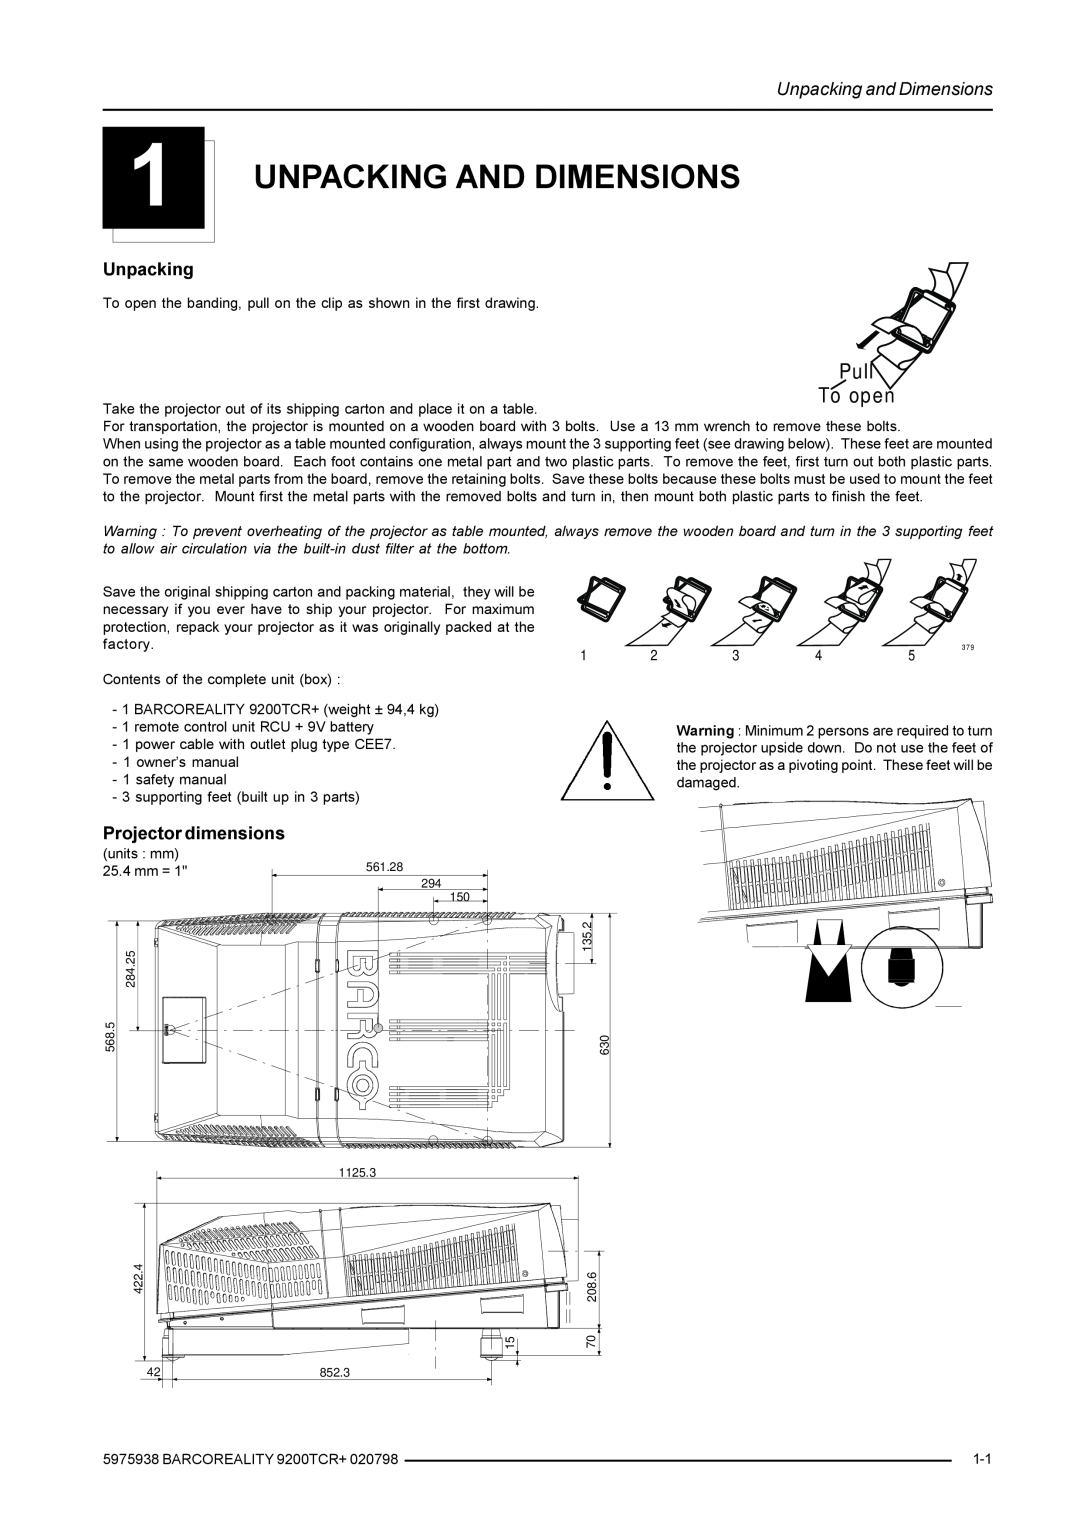 Barco R9001390 manual Unpacking And Dimensions, Unpacking and Dimensions, Projector dimensions, Pull To open 